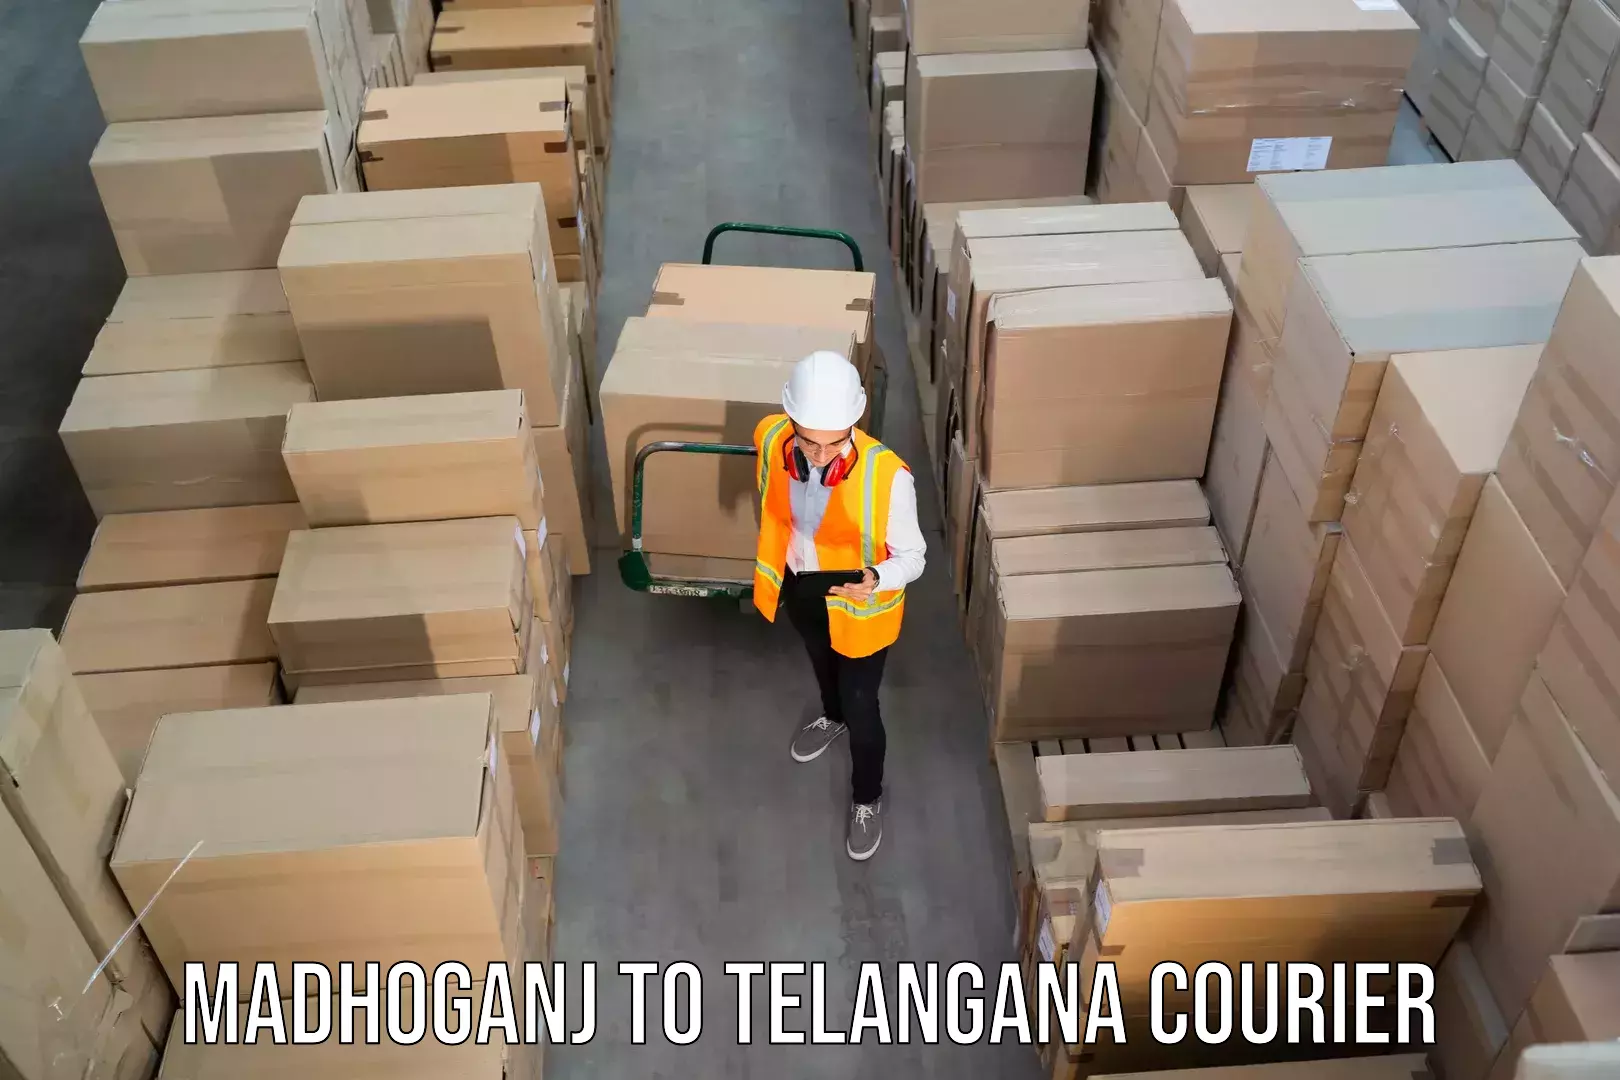 24/7 shipping services Madhoganj to Chintoor